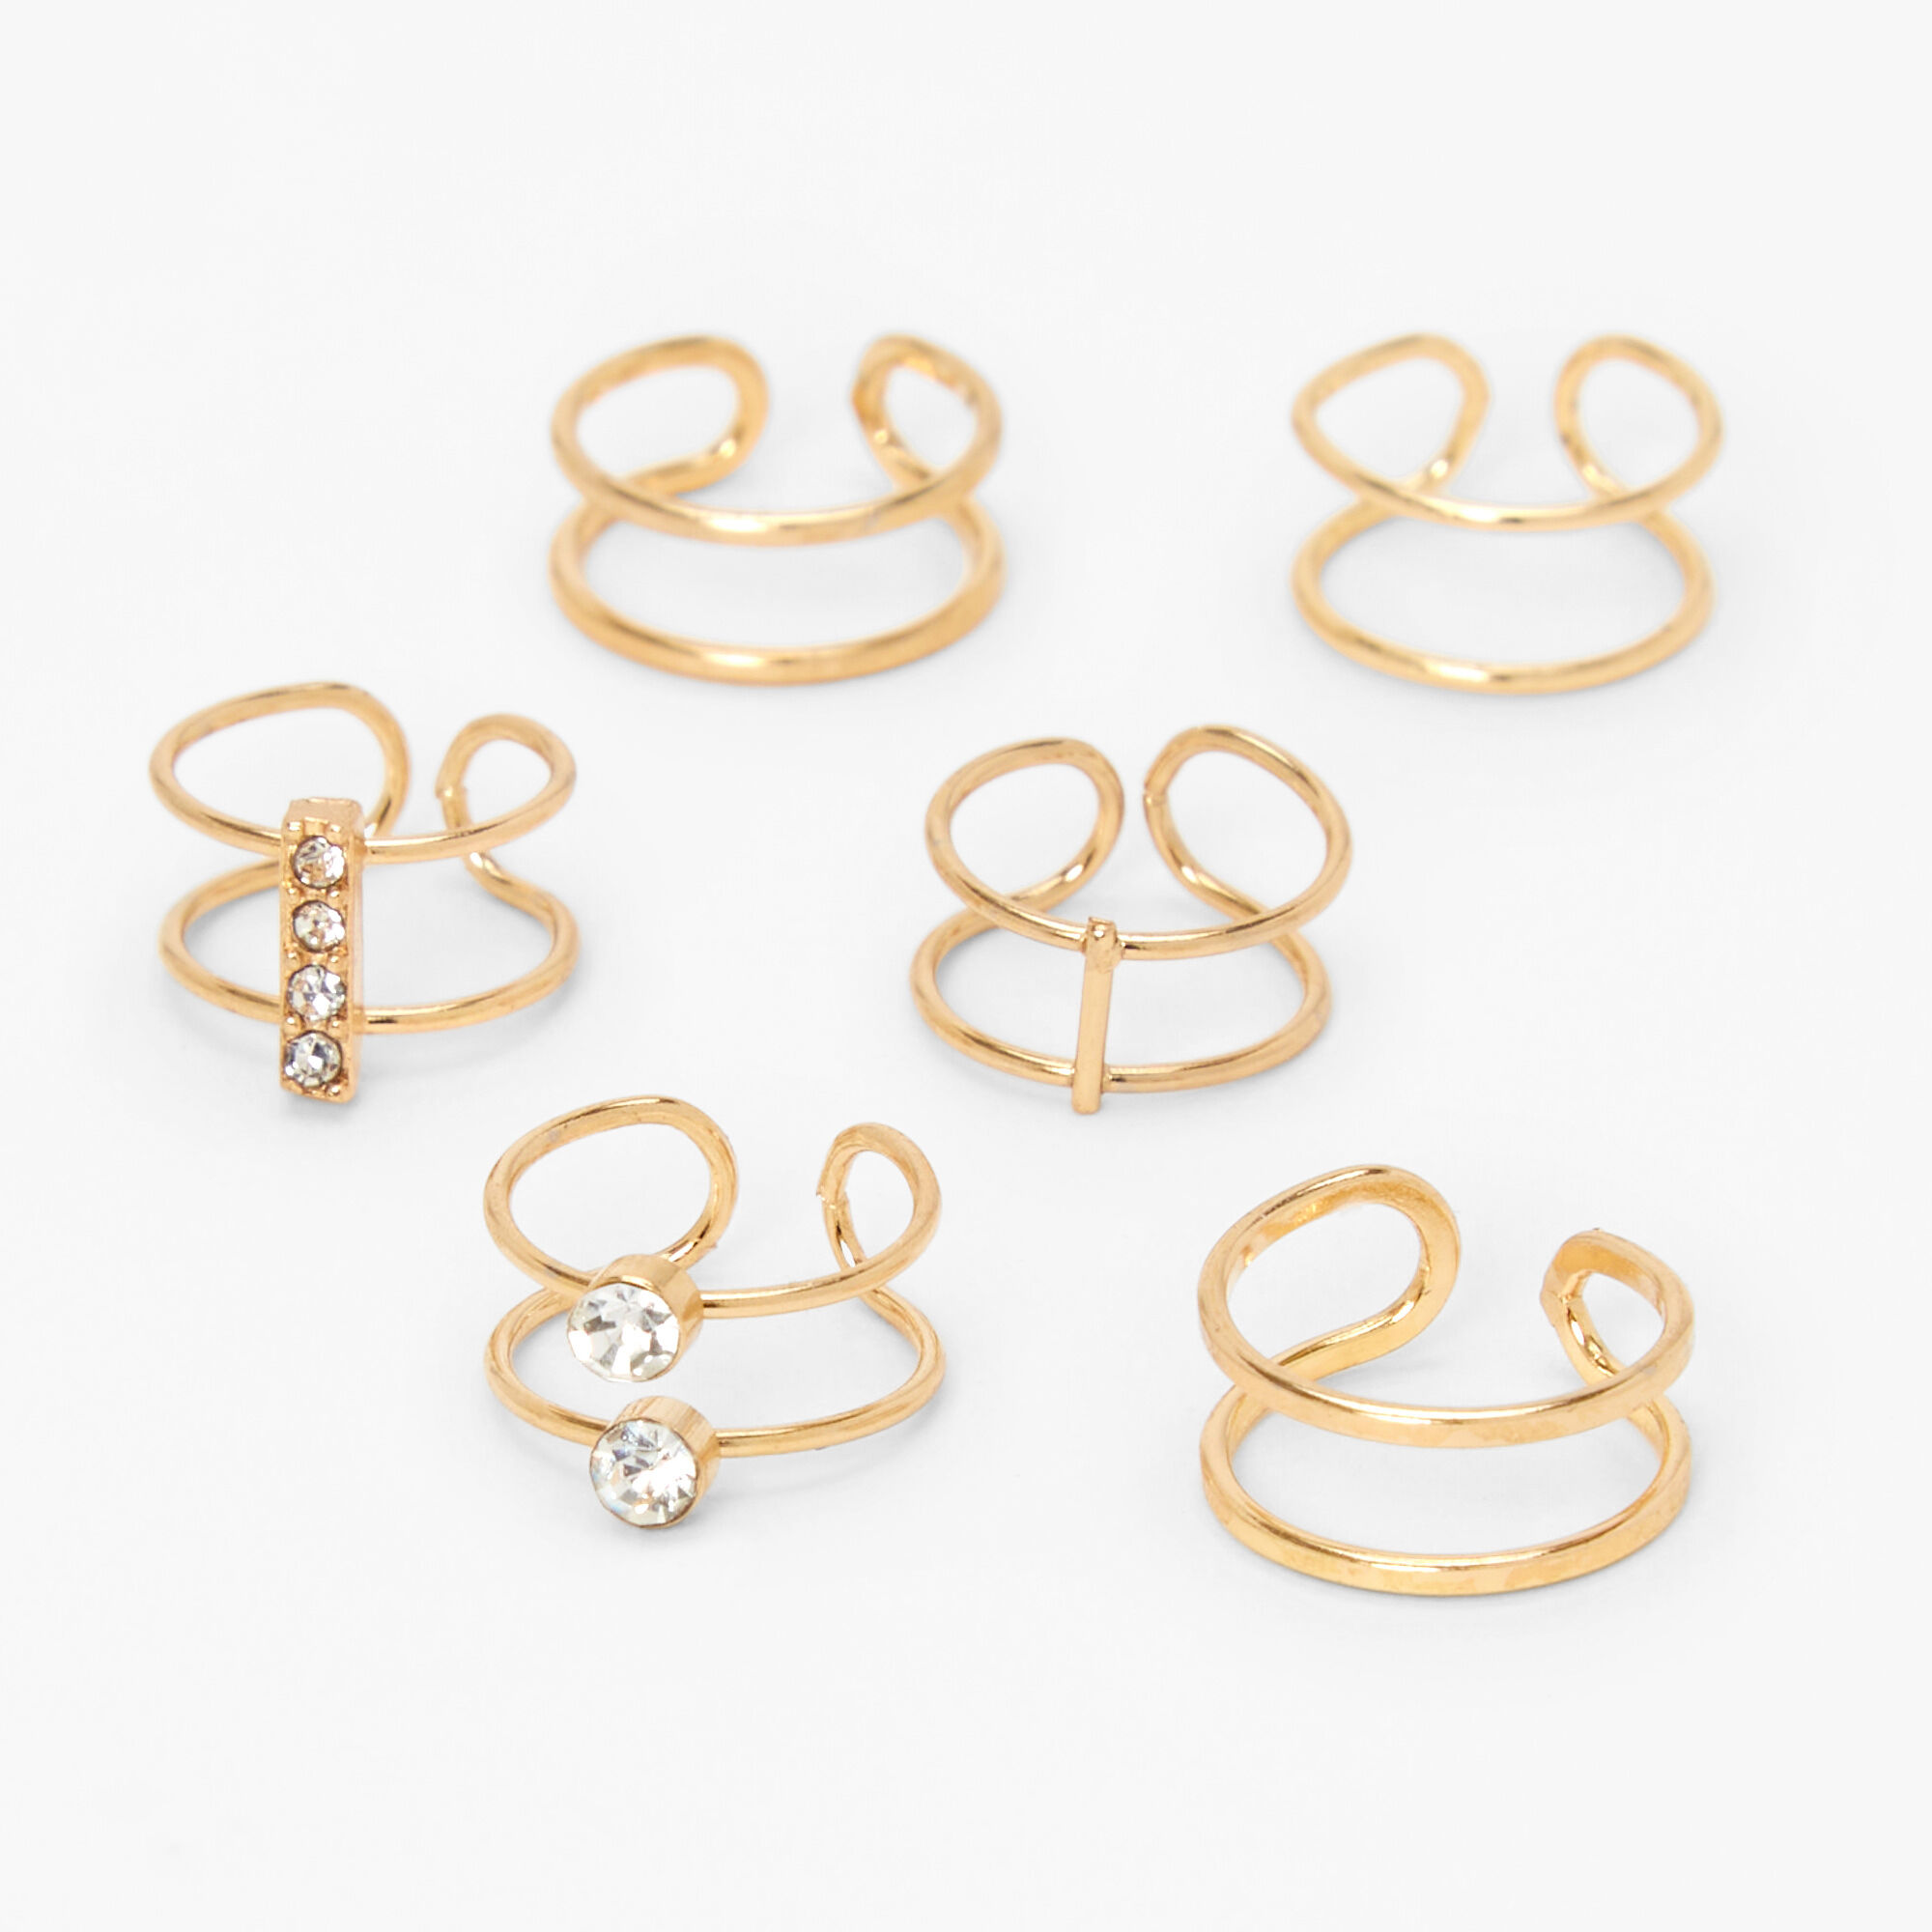 View Claires Embellished Wire Ear Cuffs 6 Pack Gold information